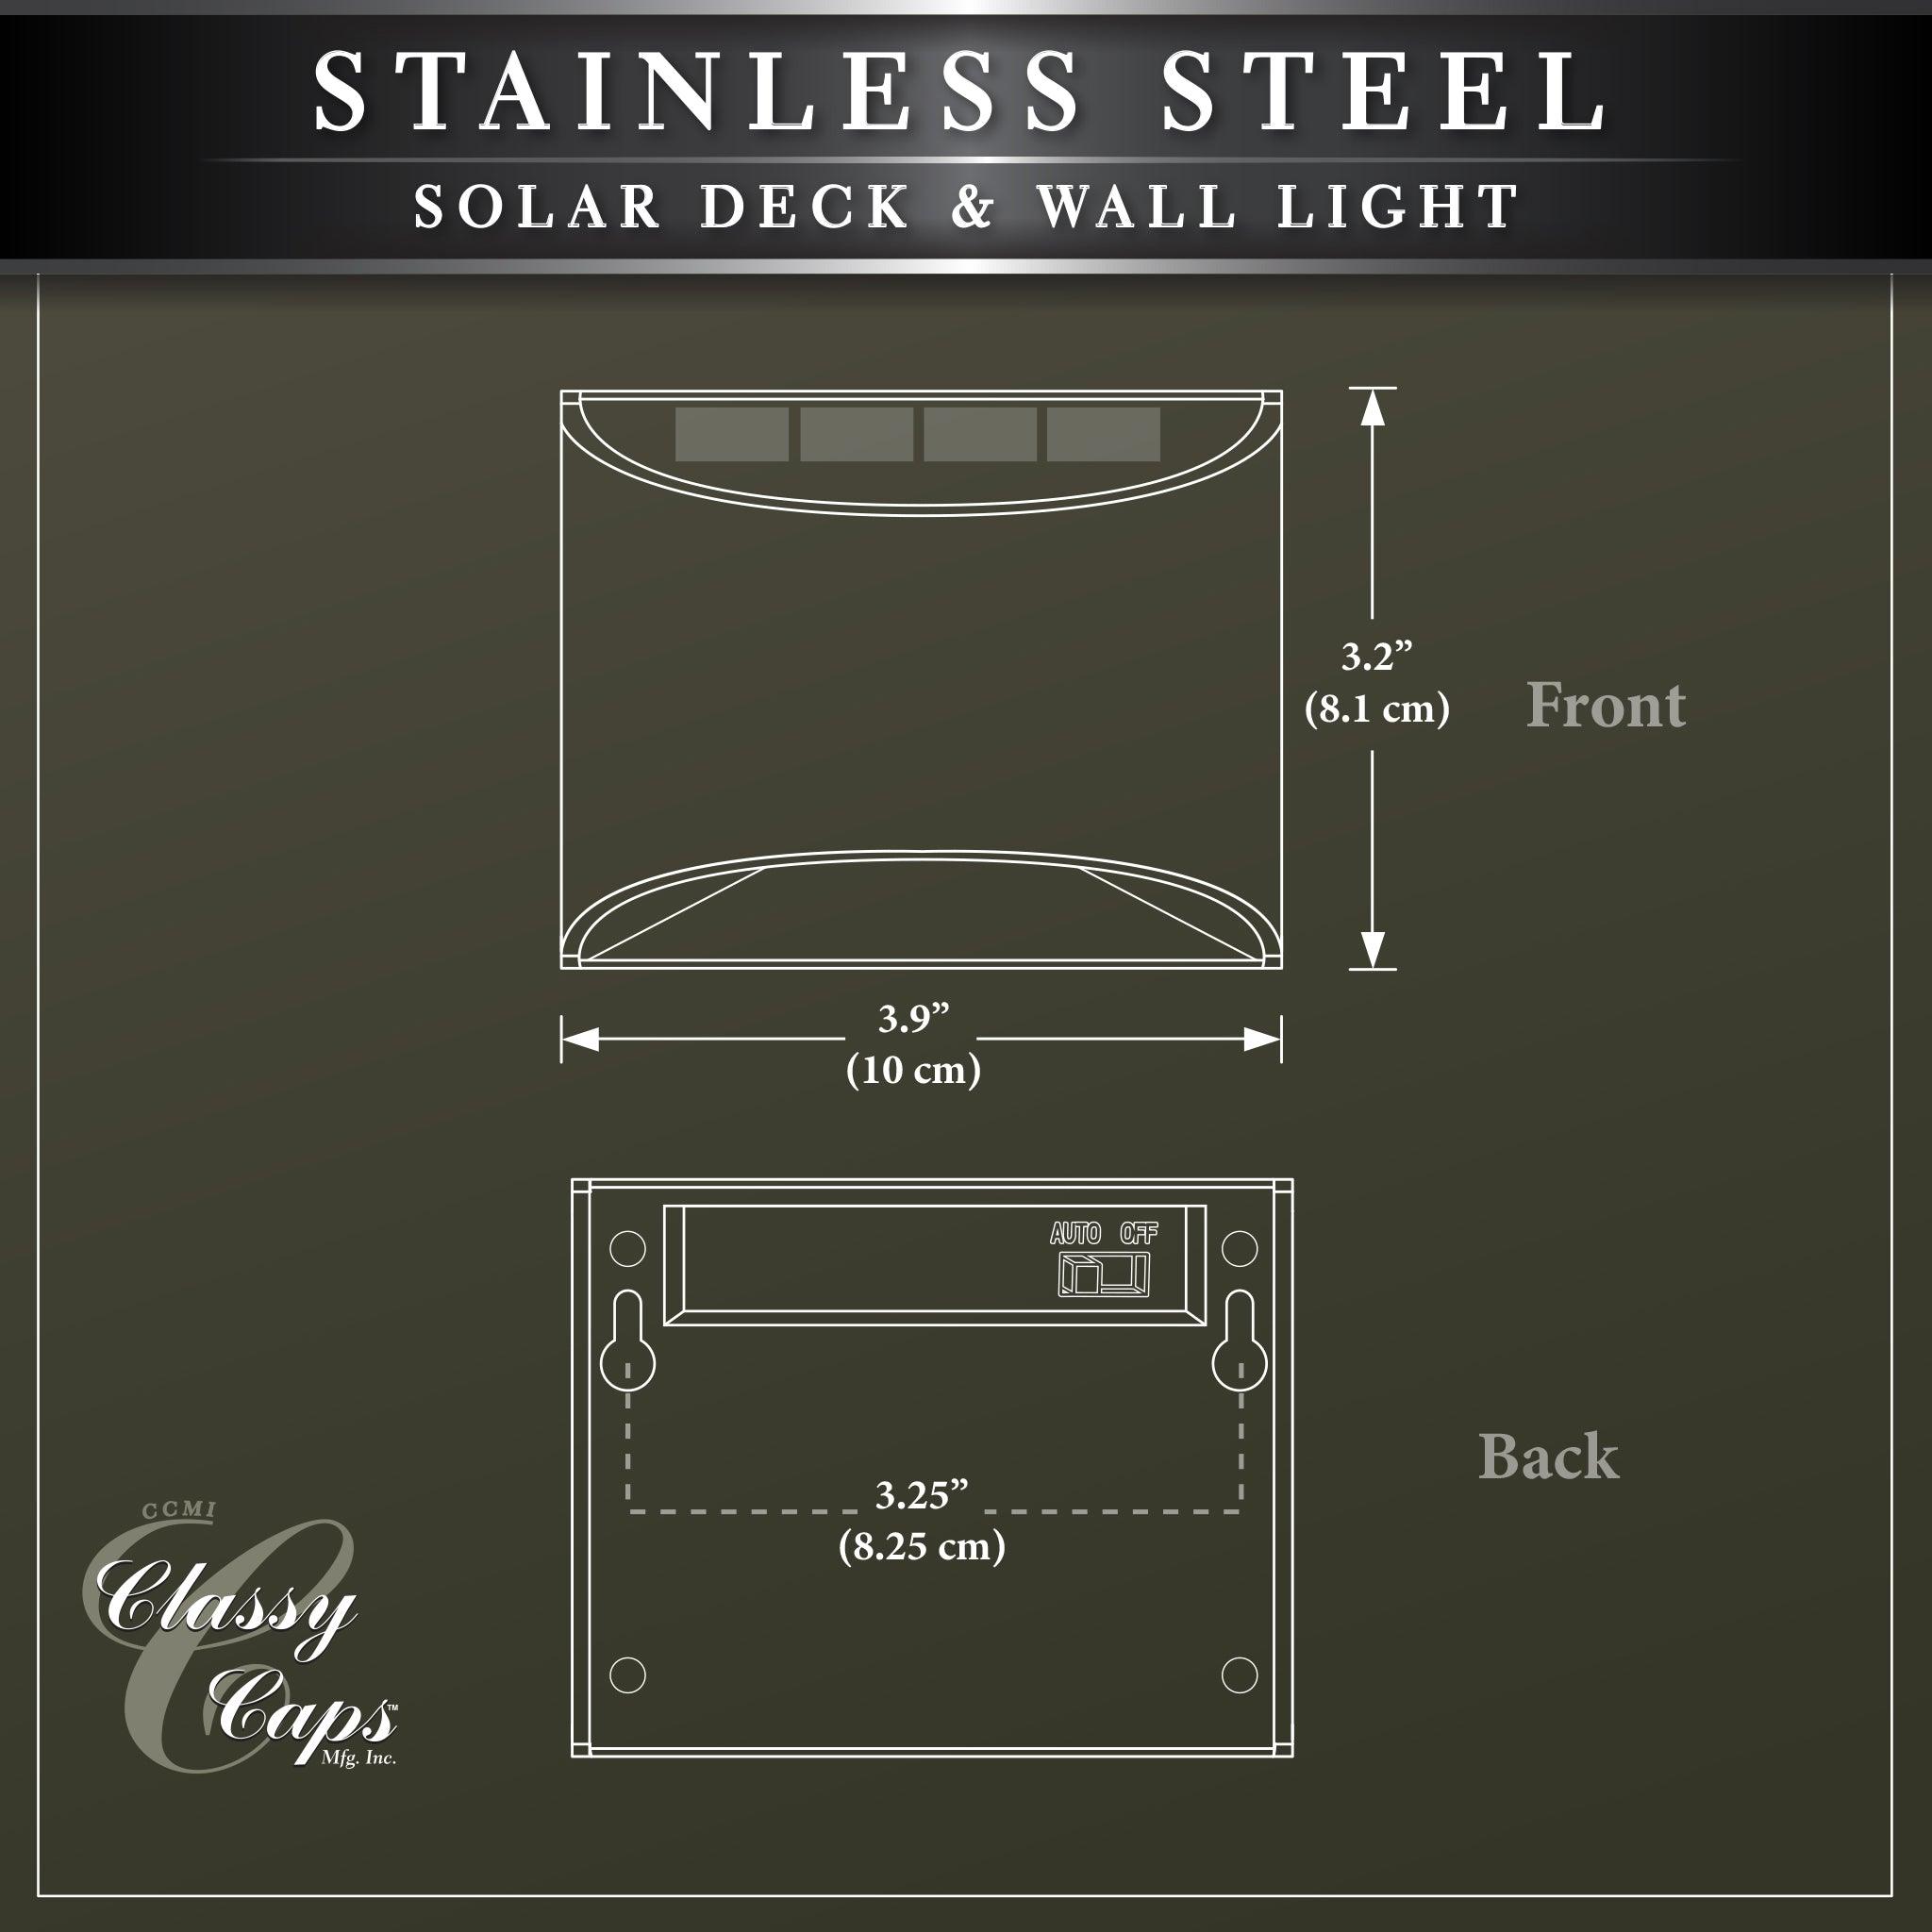 Stainless Steel Deck & Wall Light - Classy Caps Mfg. Inc.